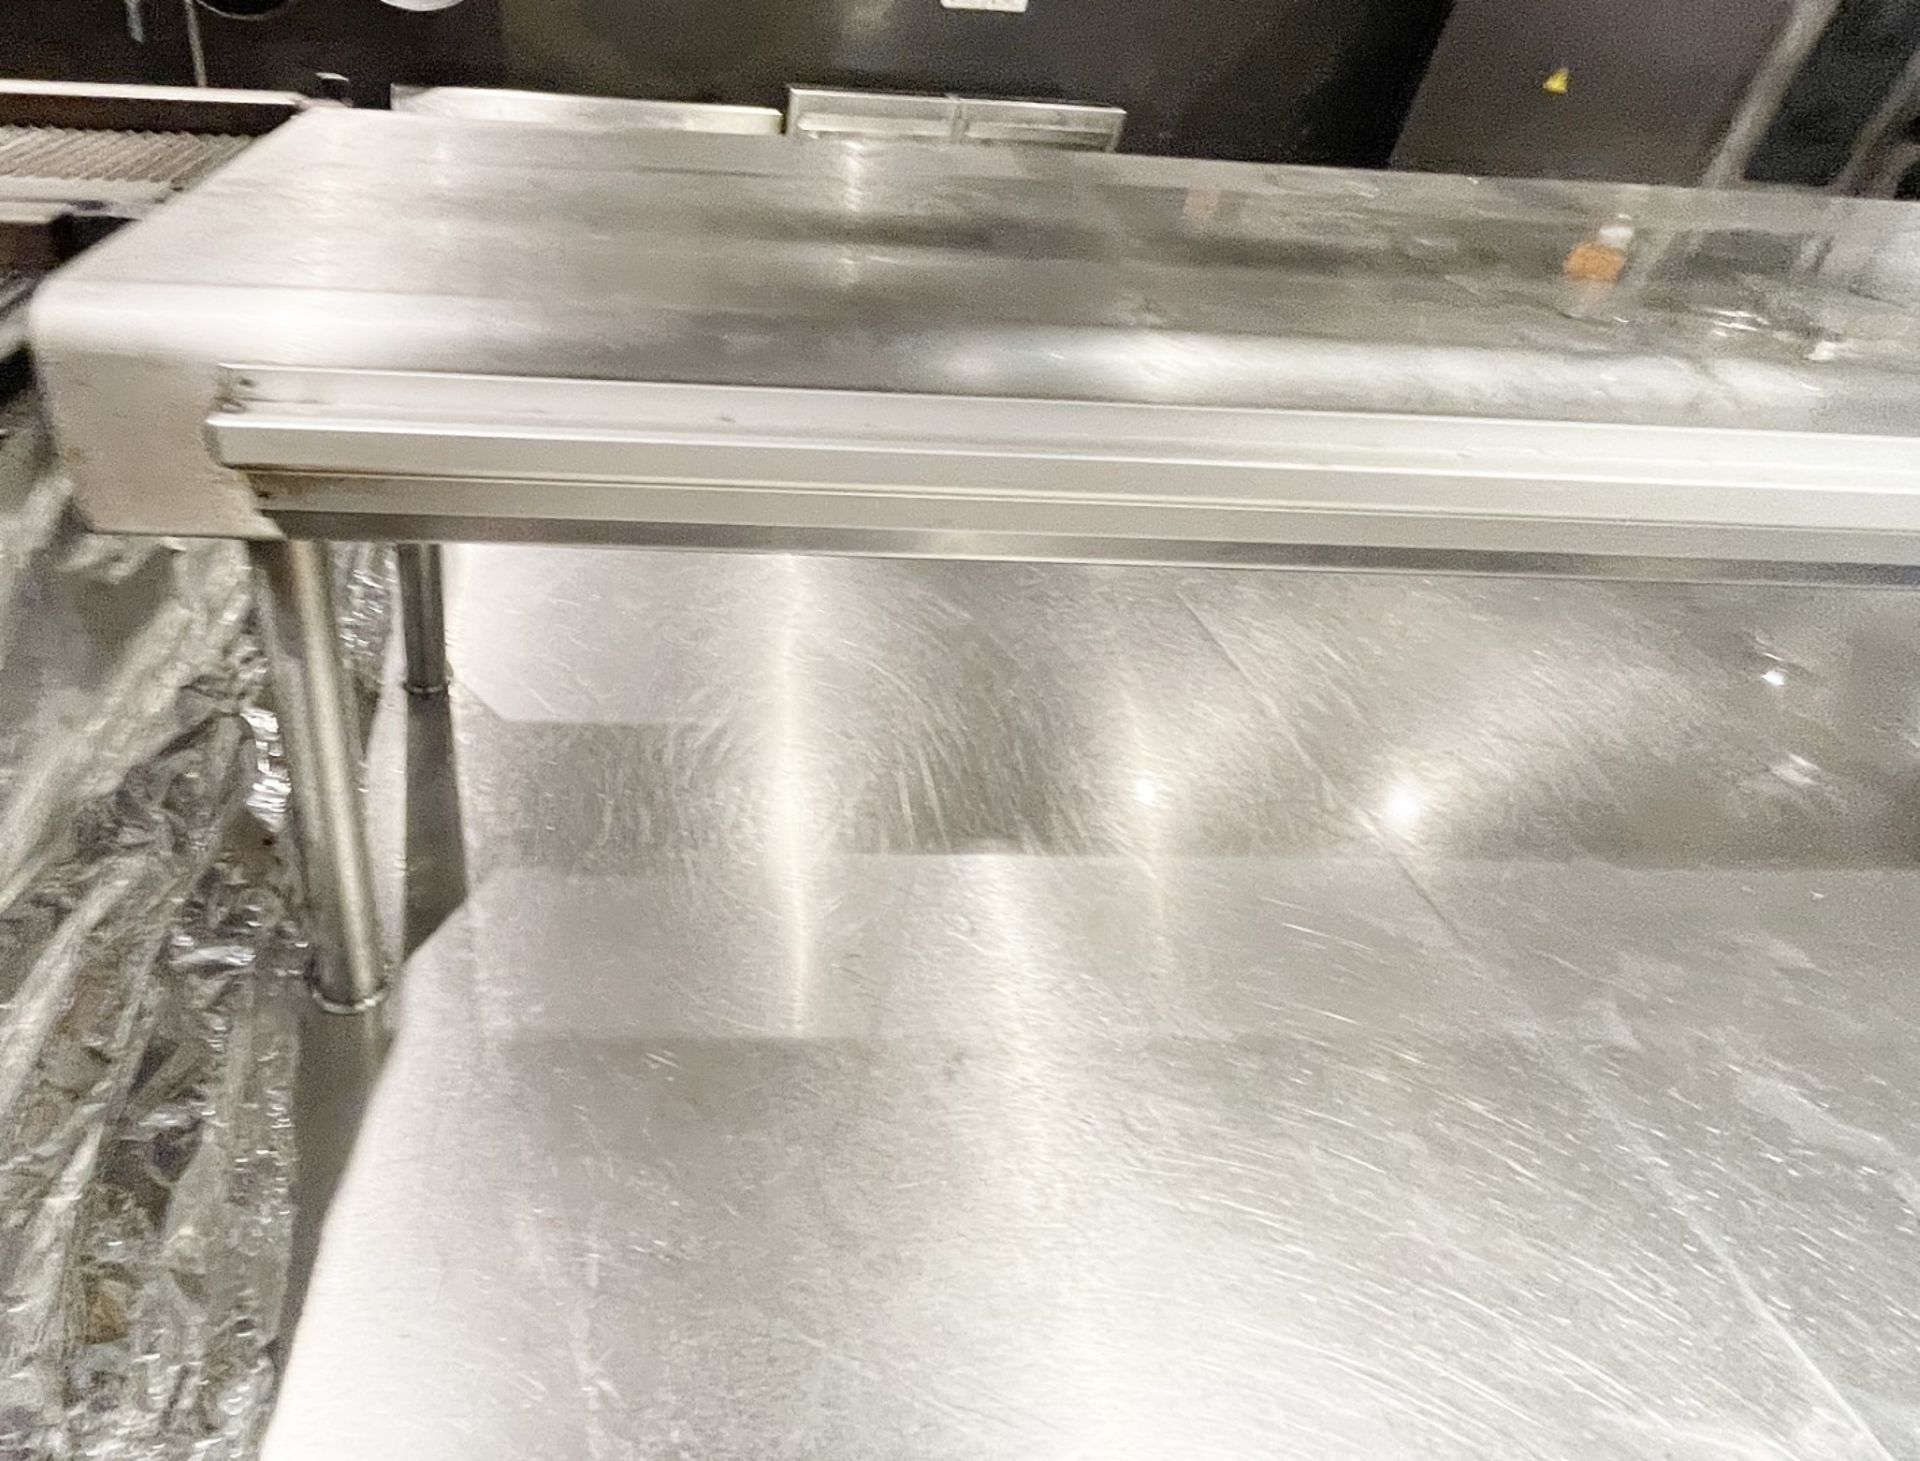 1 x Bespoke 15ft Commercial Kitchen Preparation Island with a Stainless Steel Construction - Image 11 of 15